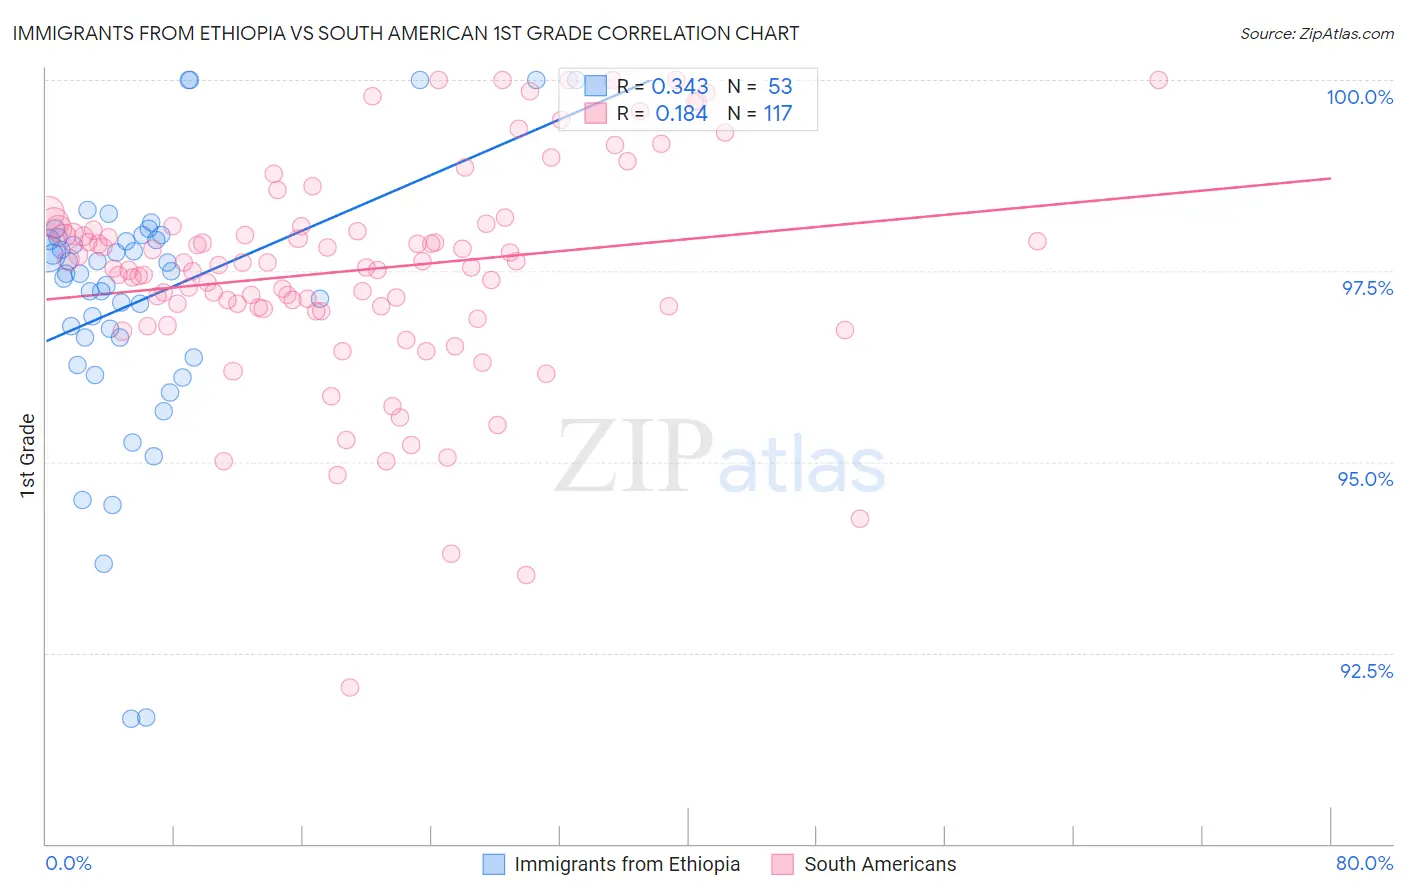 Immigrants from Ethiopia vs South American 1st Grade